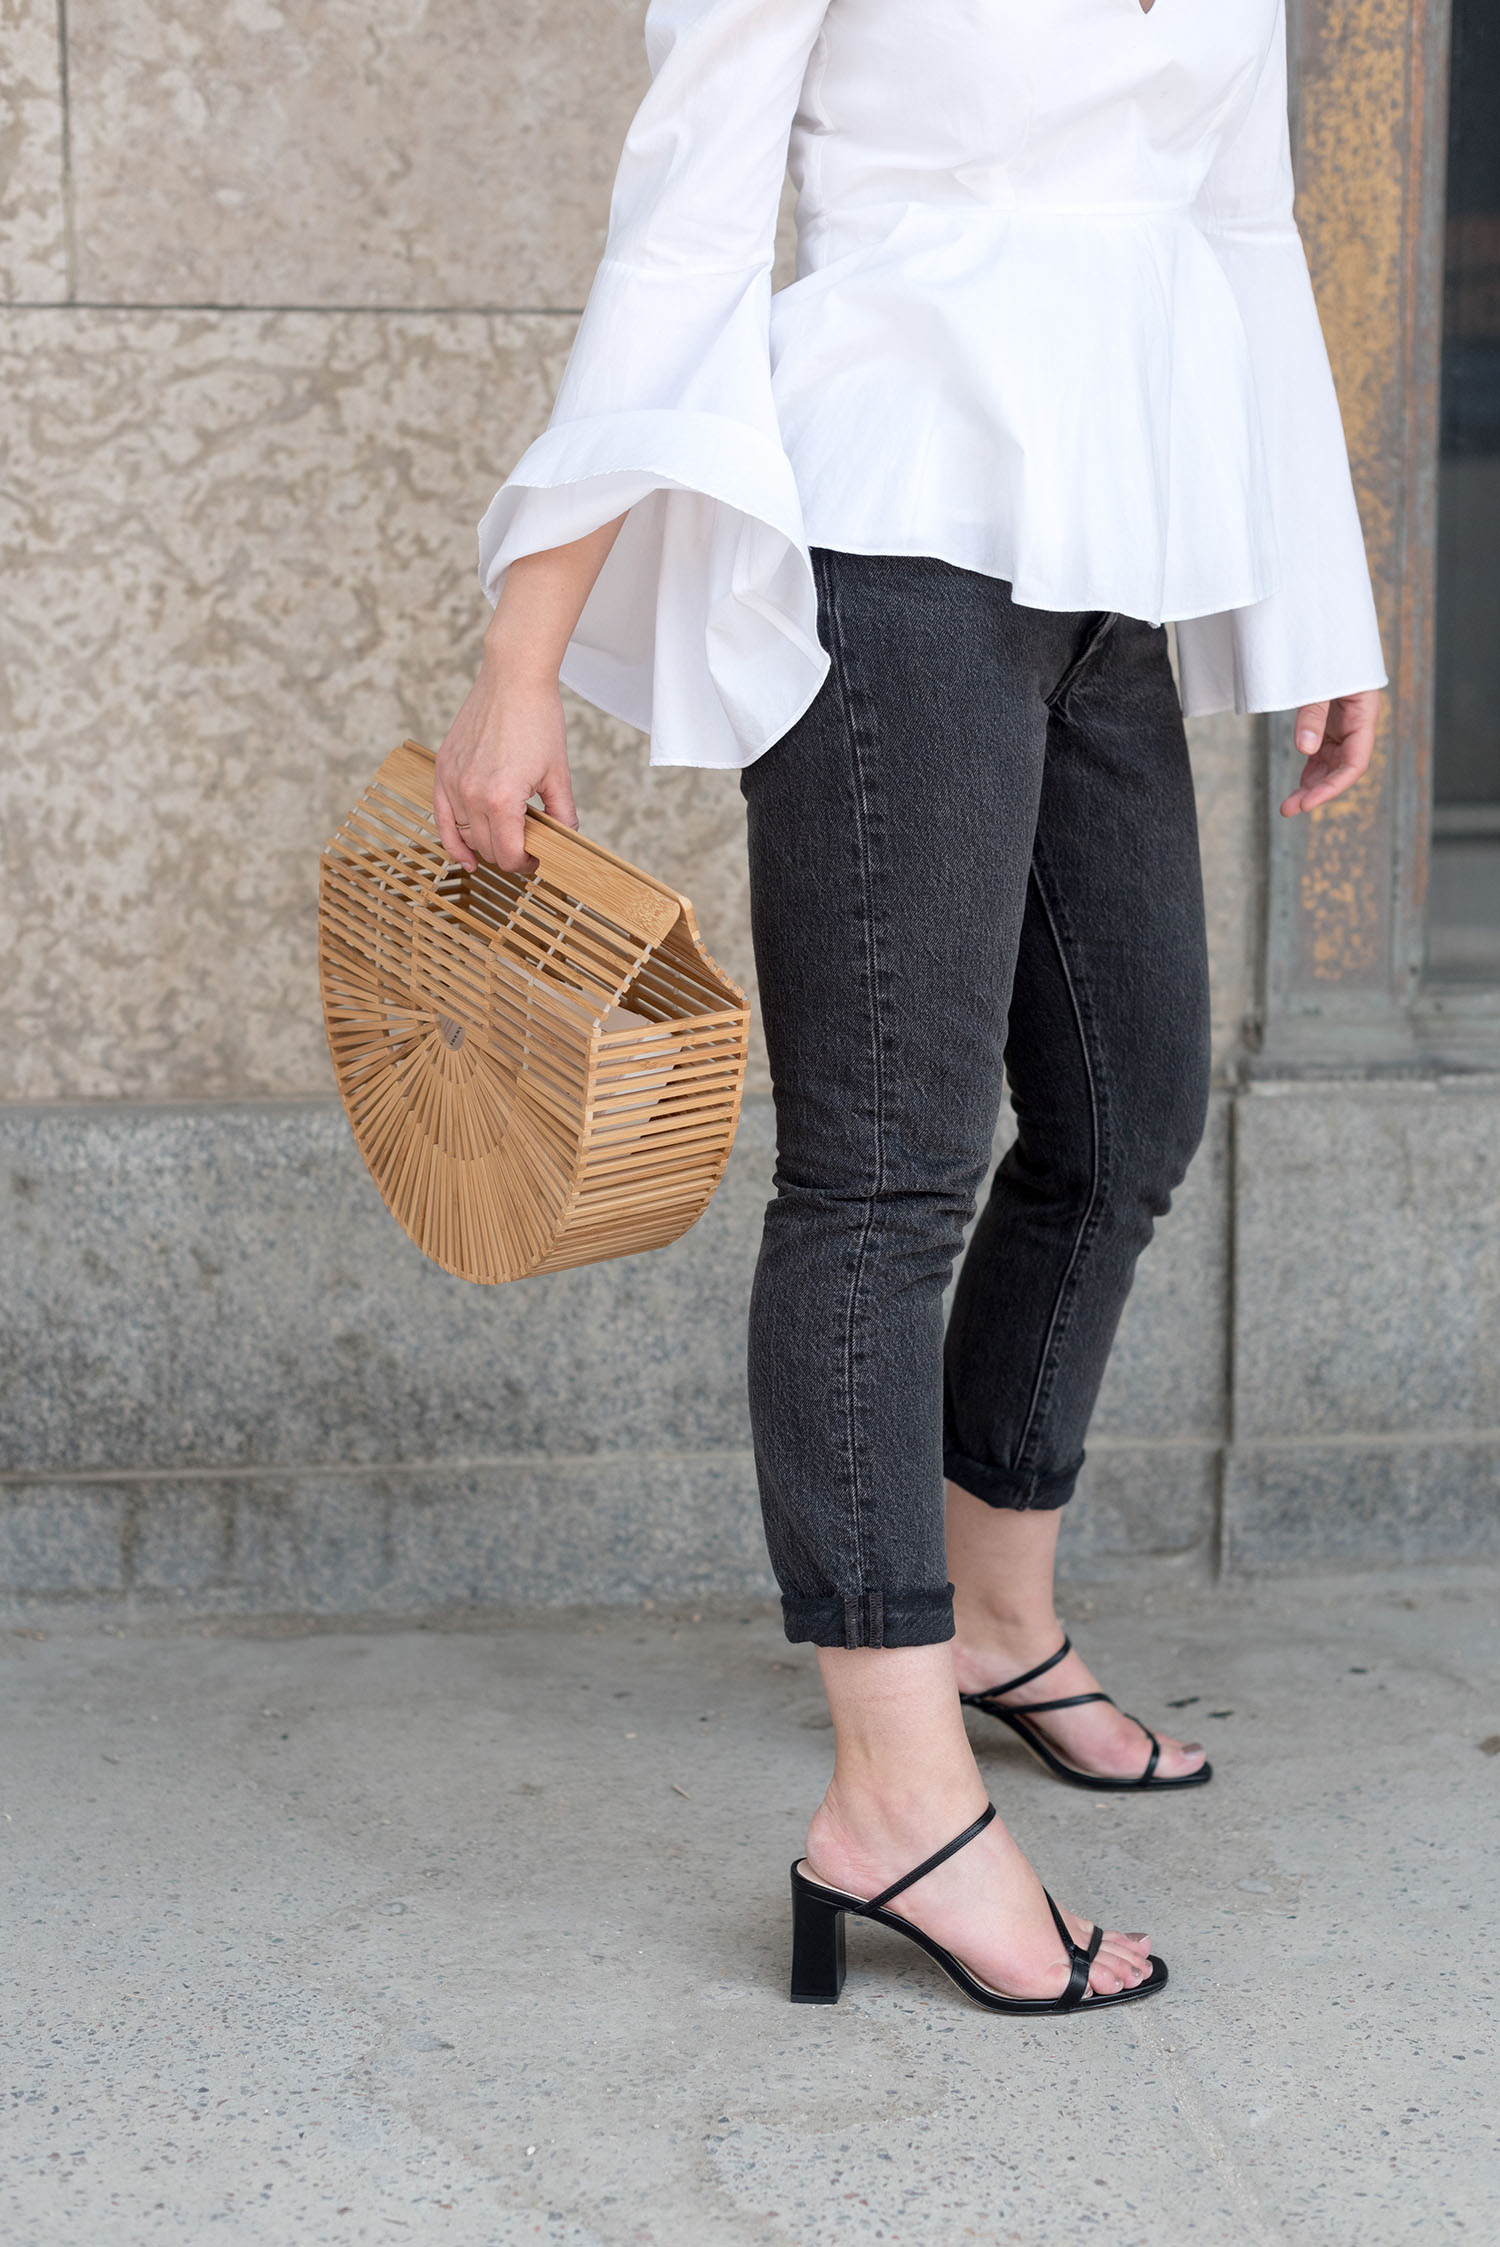 Outfit details on top Winnipeg fashion blogger Cee Fardoe of Coco & Vera, including Zara sandals and Levi's black jeans